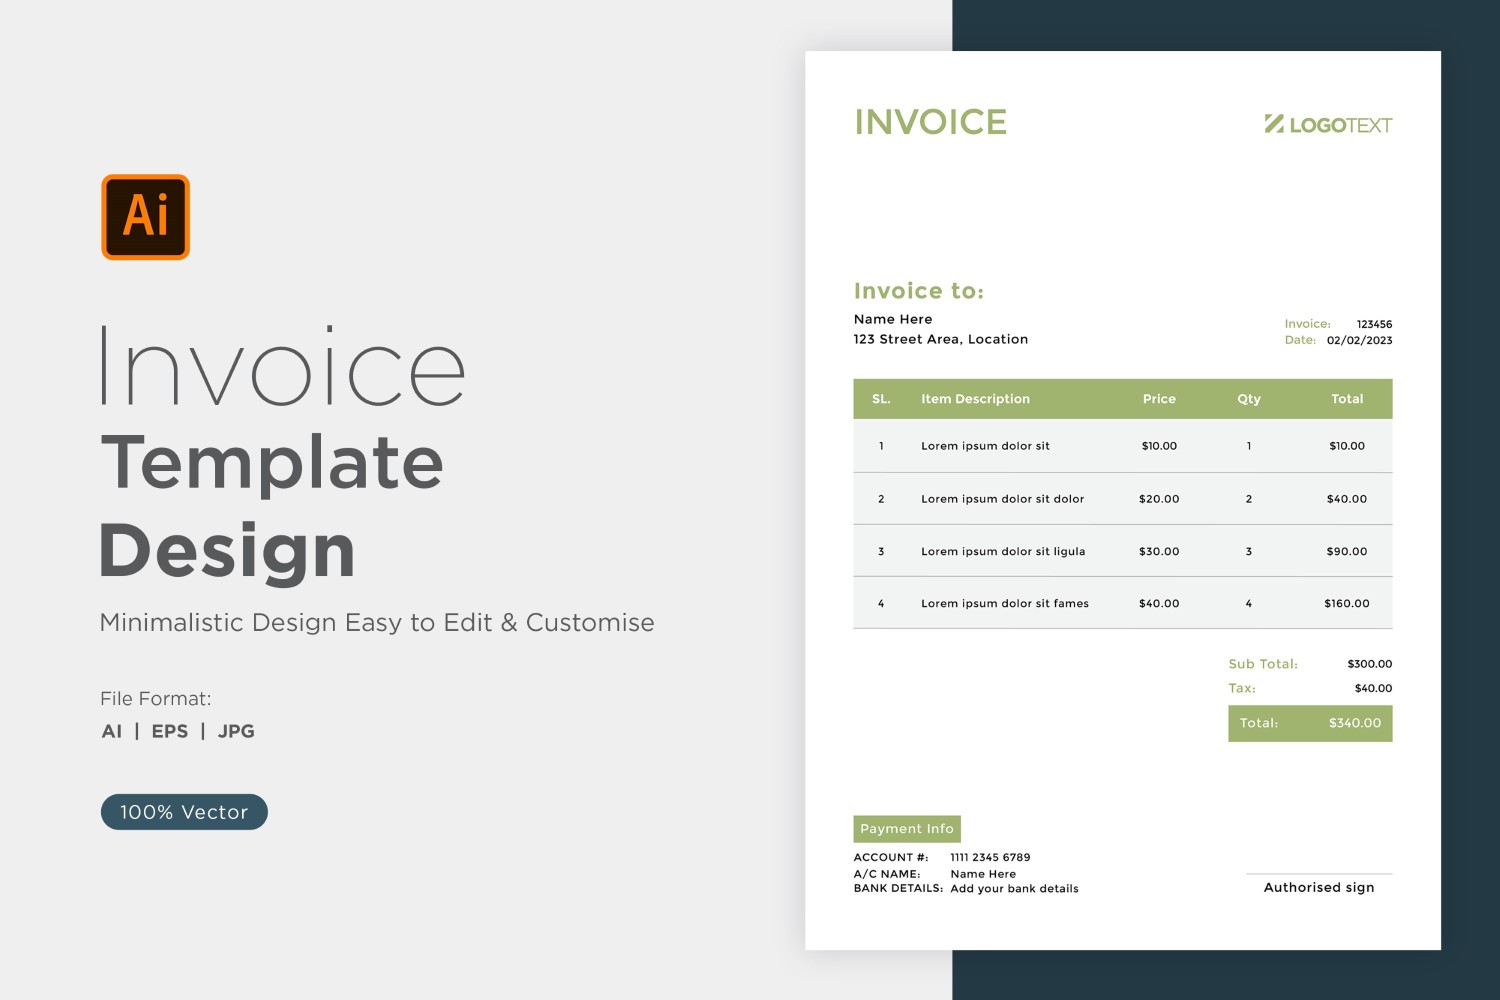 Corporate Invoice Design Template Bill form Business Payments Details Design Template 94